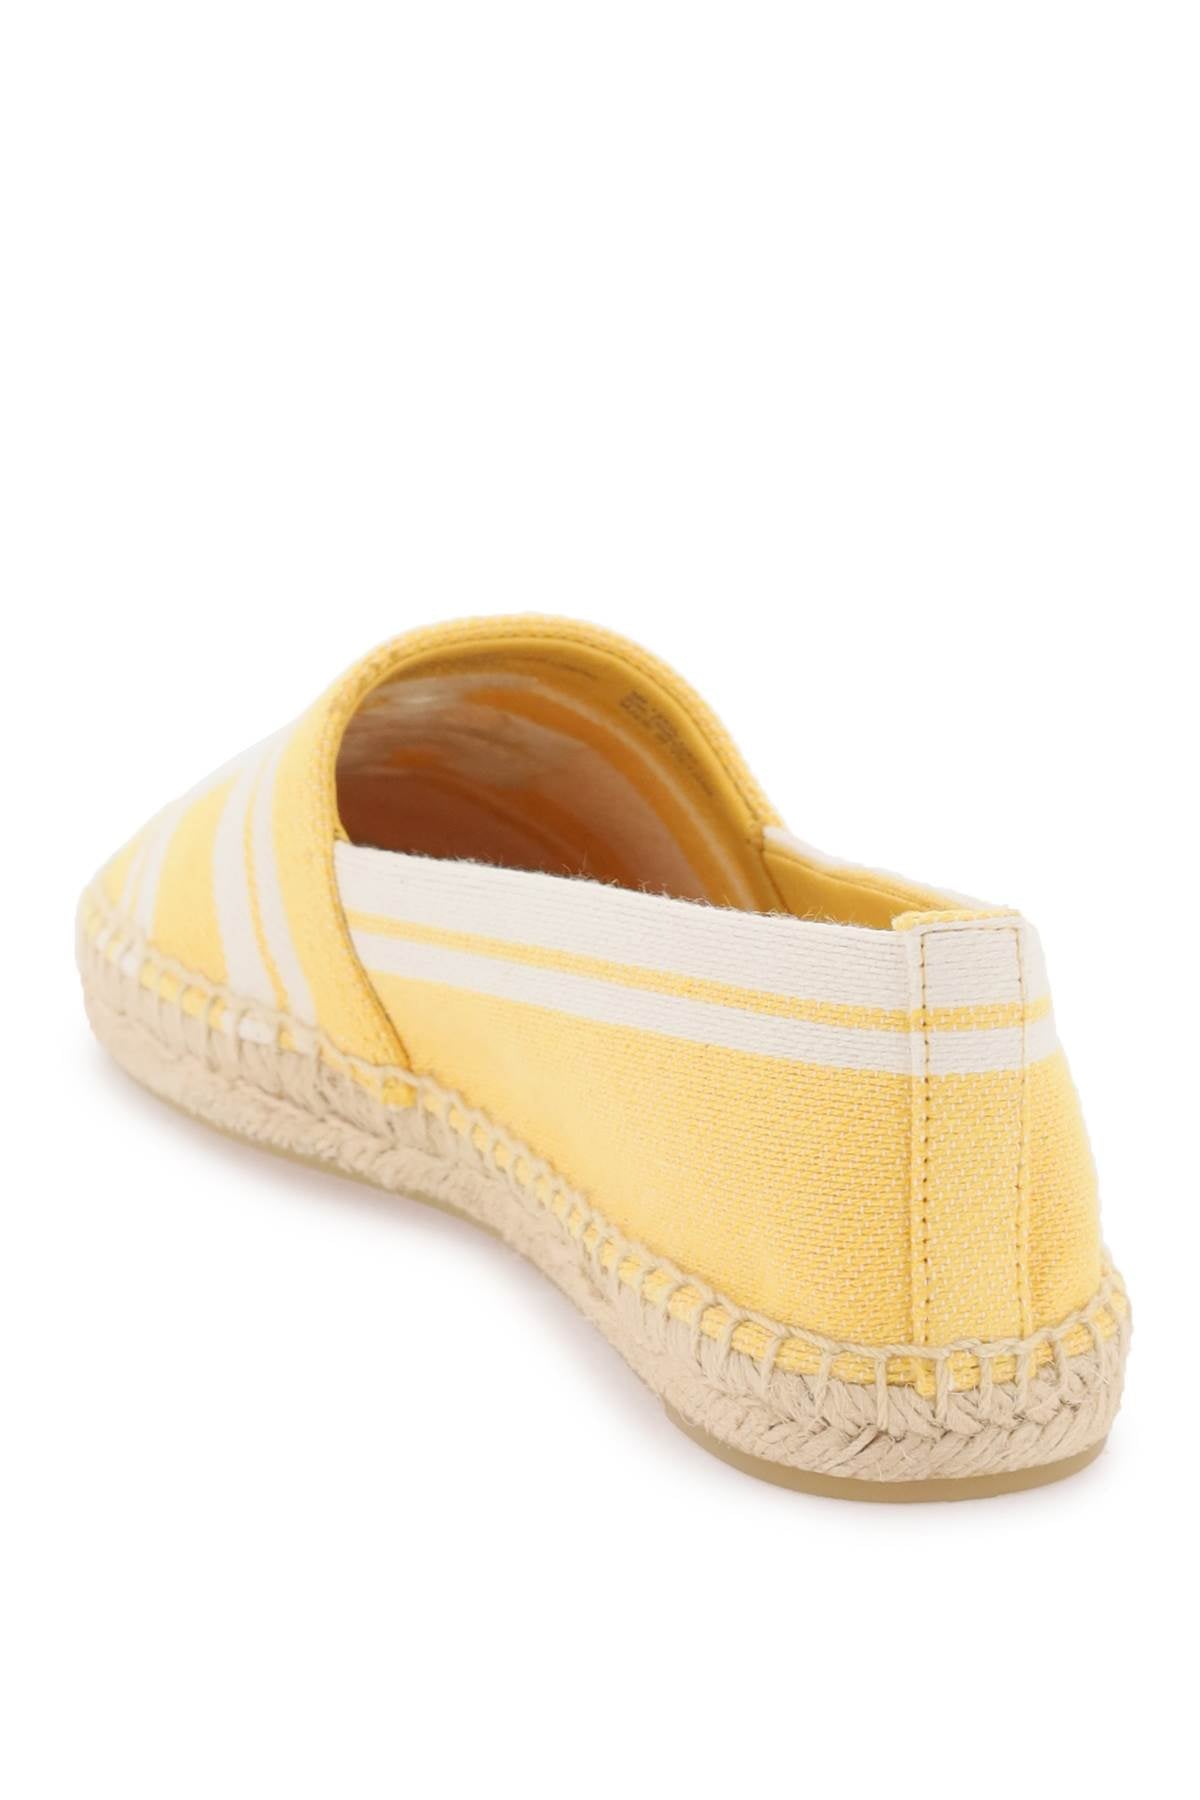 Tory burch striped espadrilles with double t-2